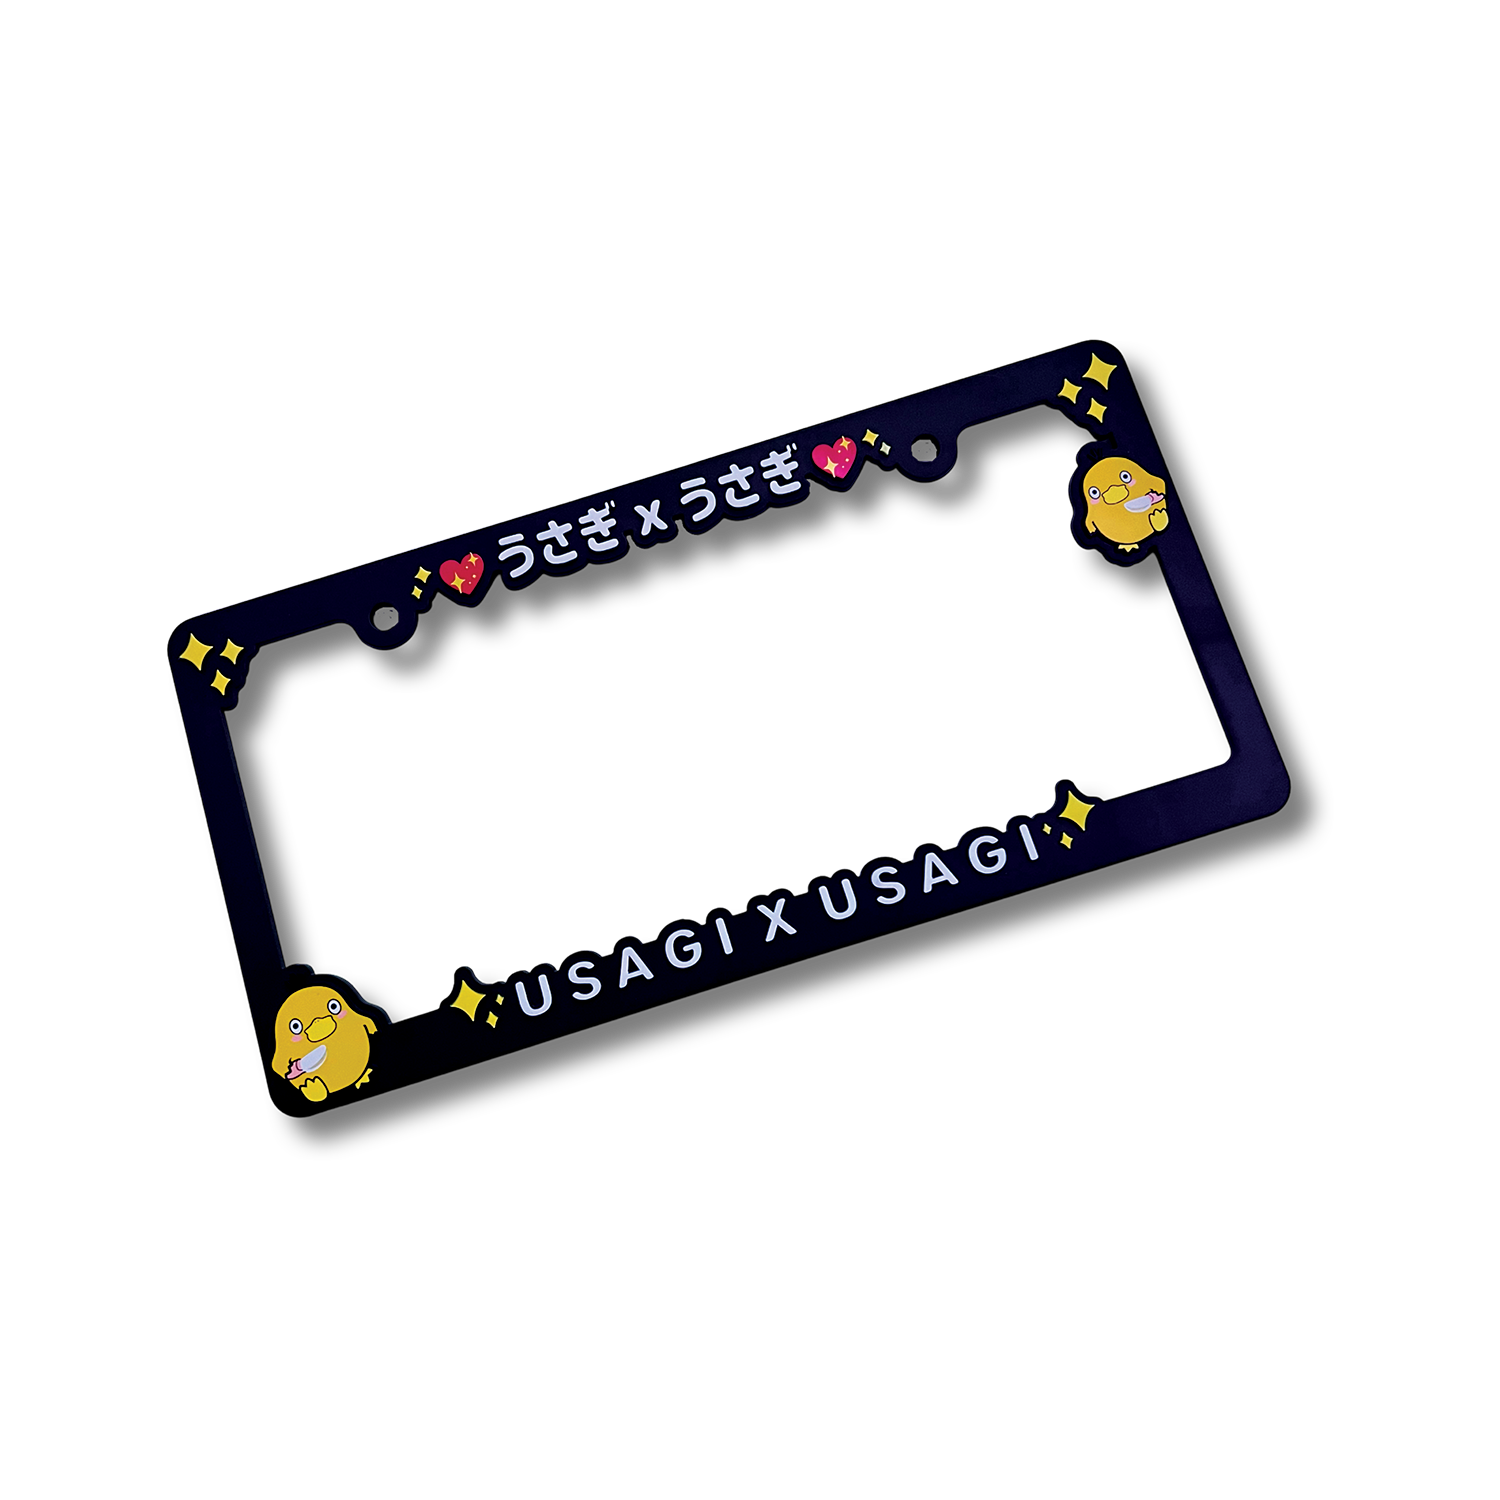 Psyduck License Plate features black plastic license plate with brand logo in Japanese characters and English text, 'USAGI X USAGI' with yellow sparkles and two Psyduck with Knife characters on each respective side.